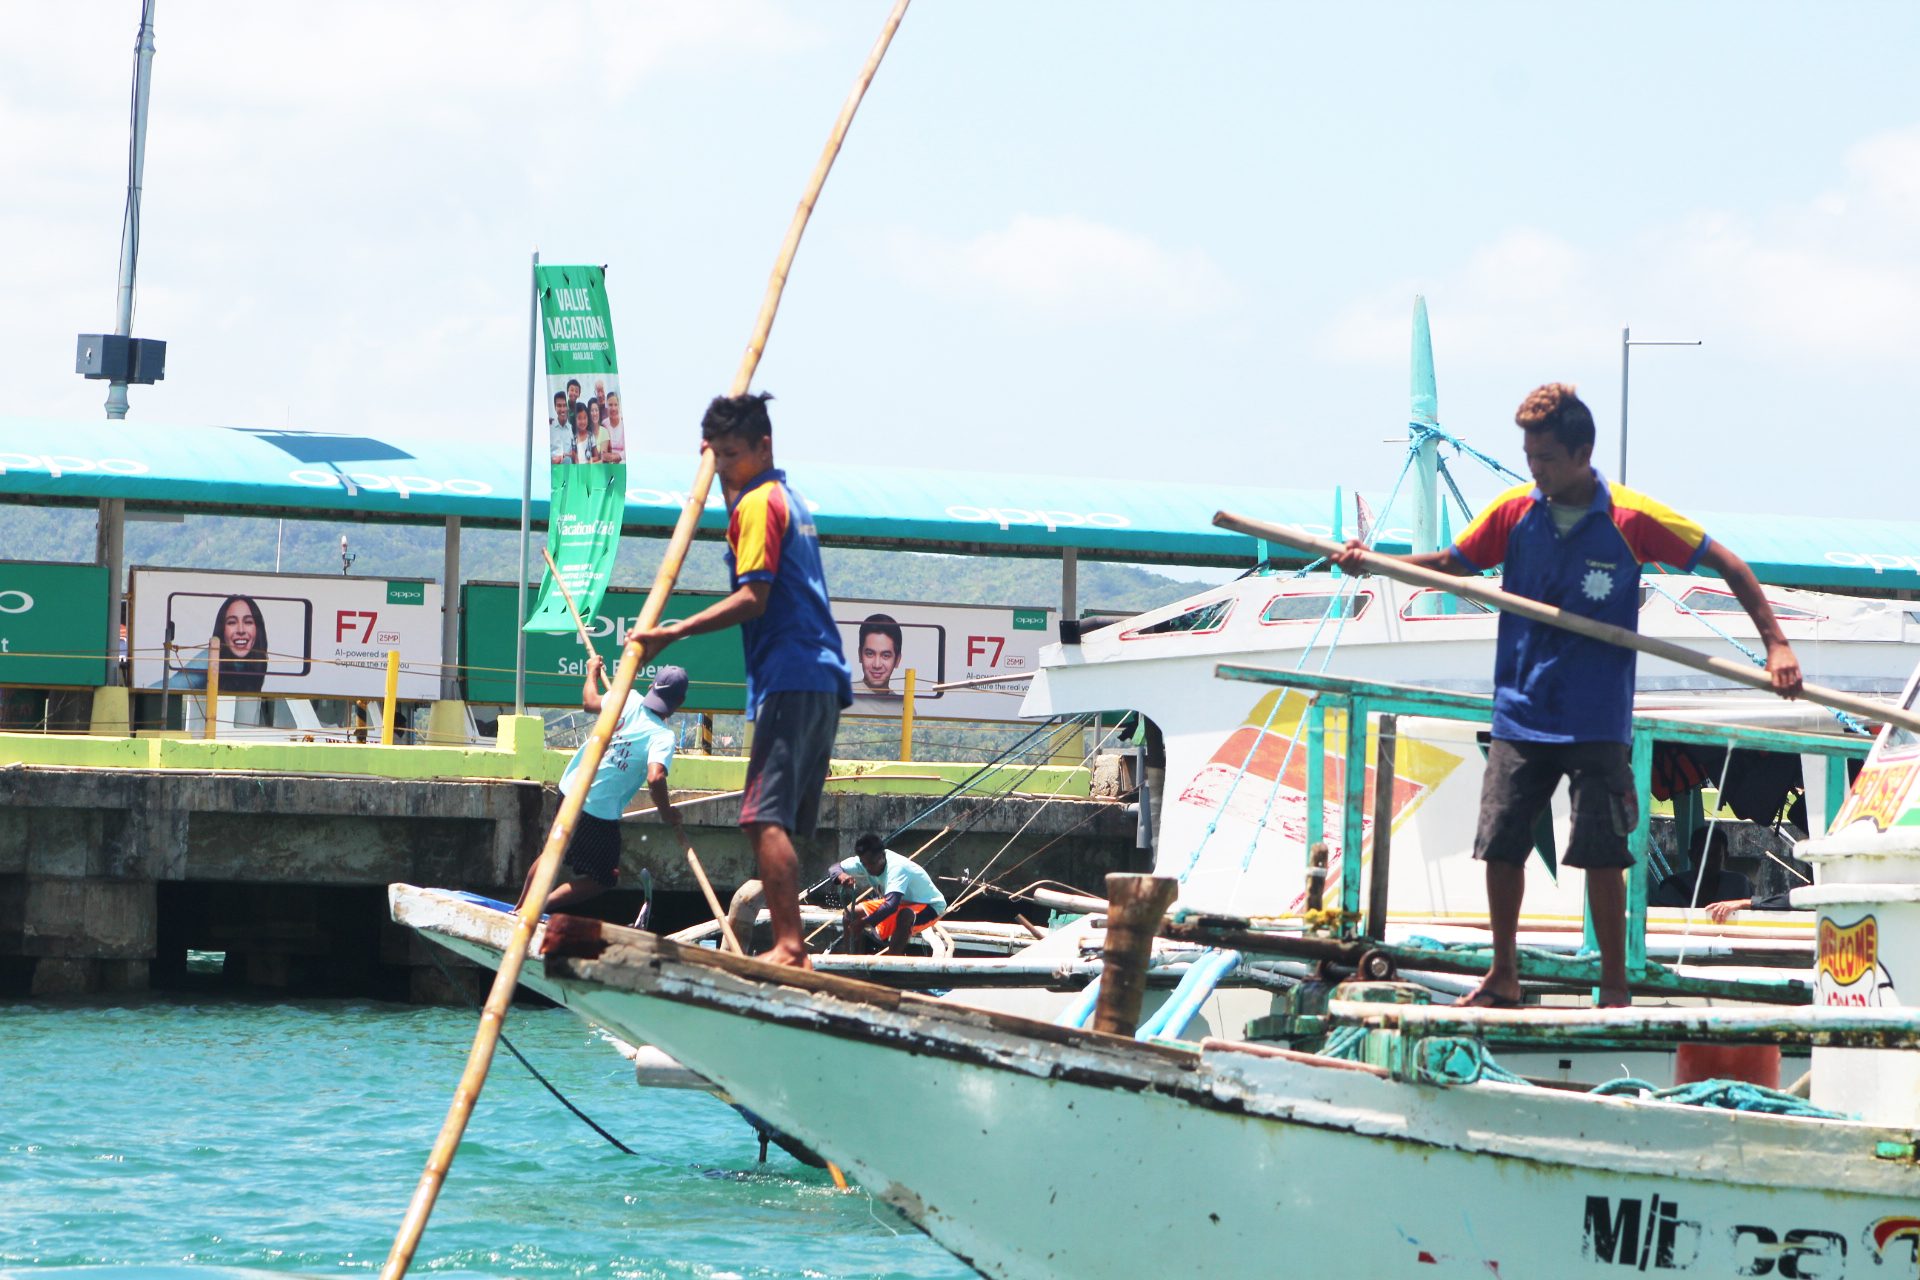 State of calamity declaration sought for mainland Boracay